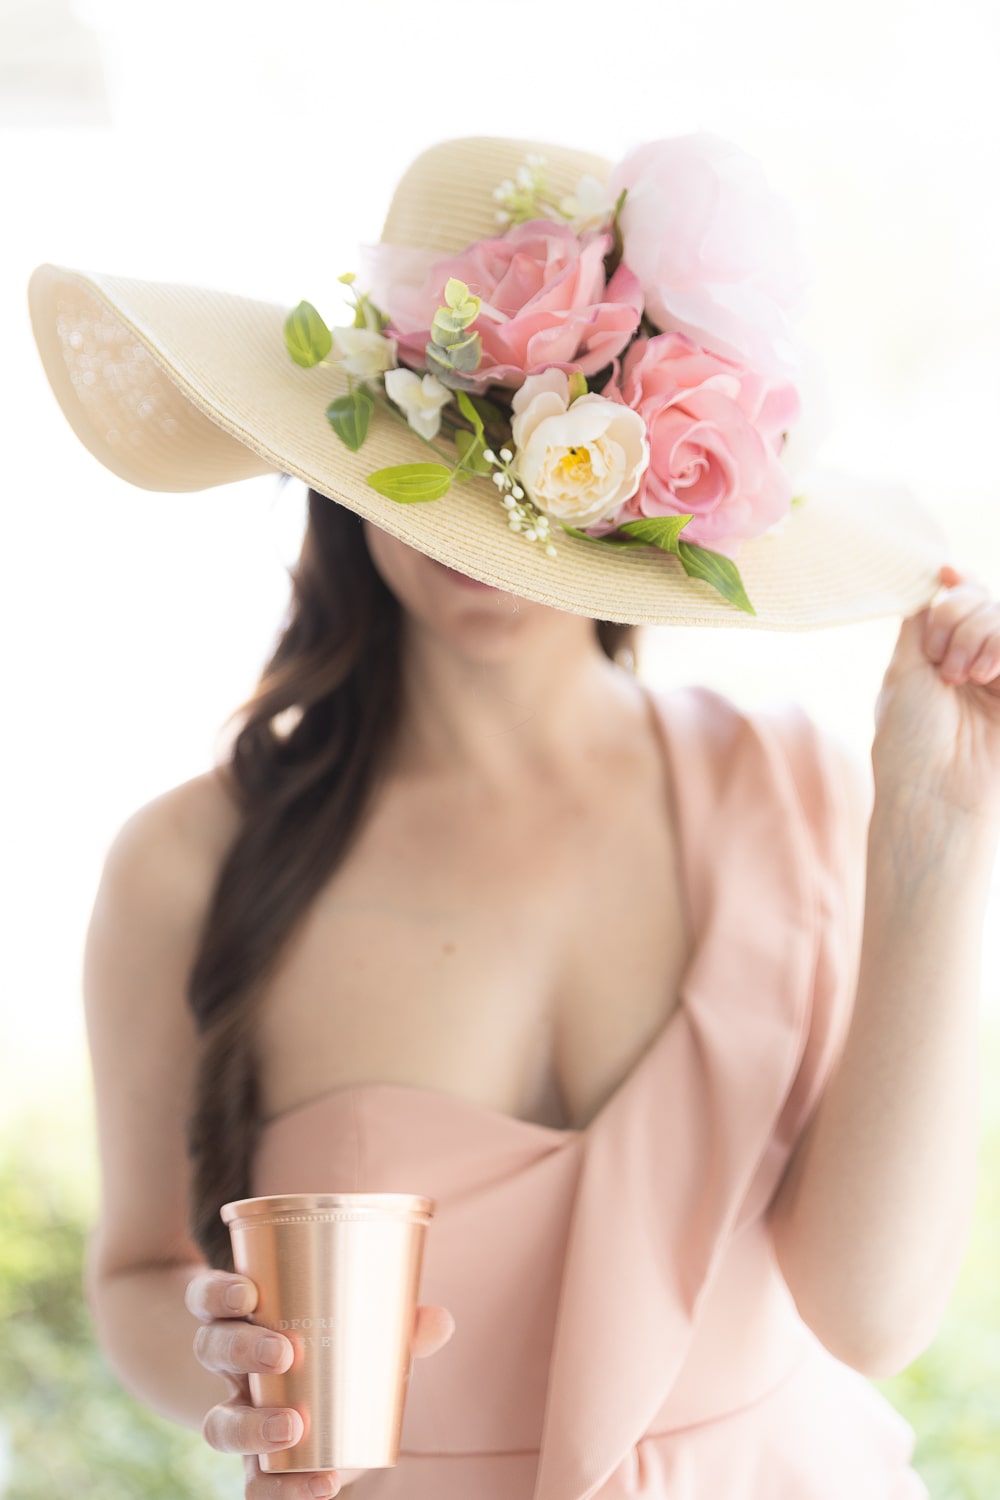 DIY derby hat created by southern blogger Stephanie Ziajka on Diary of a Debutante